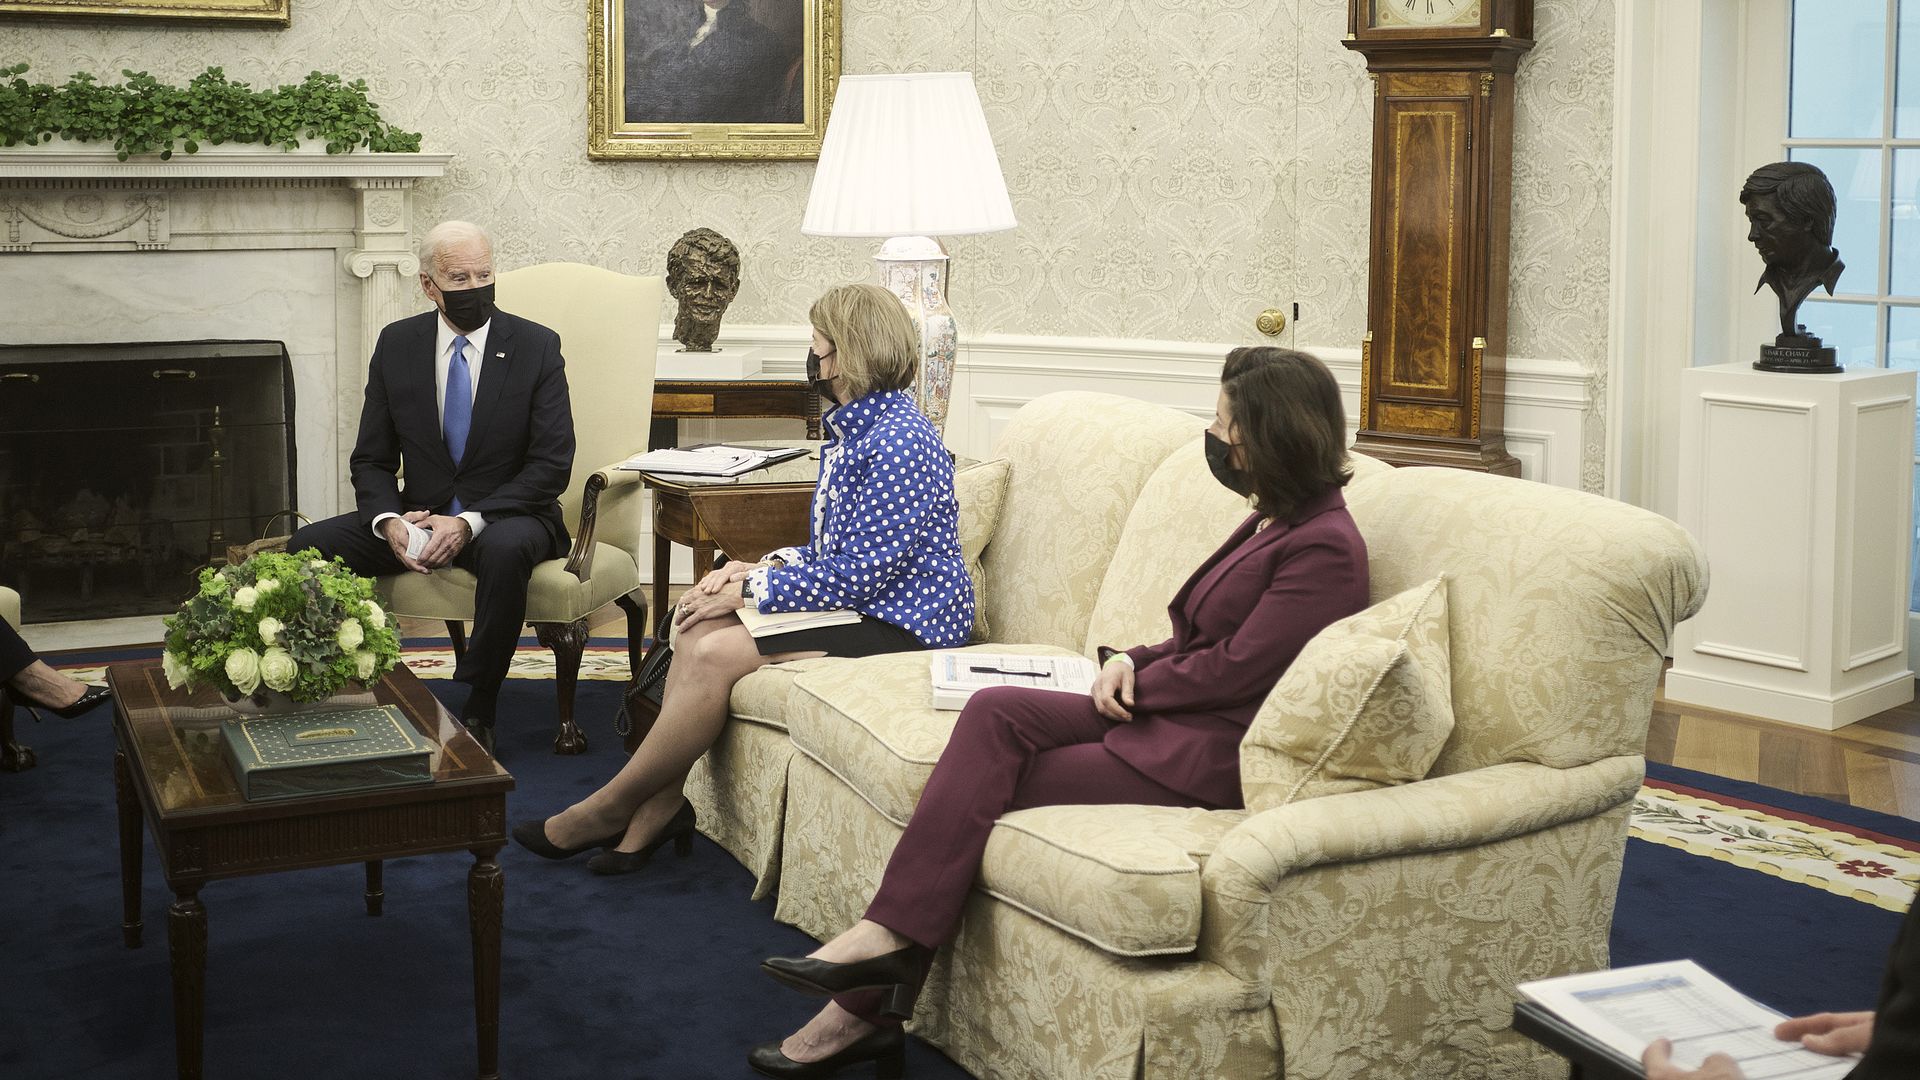 Photo of Joe Biden, Shelley Capito and Gina Raimondo sitting in a meeting in the Oval Office